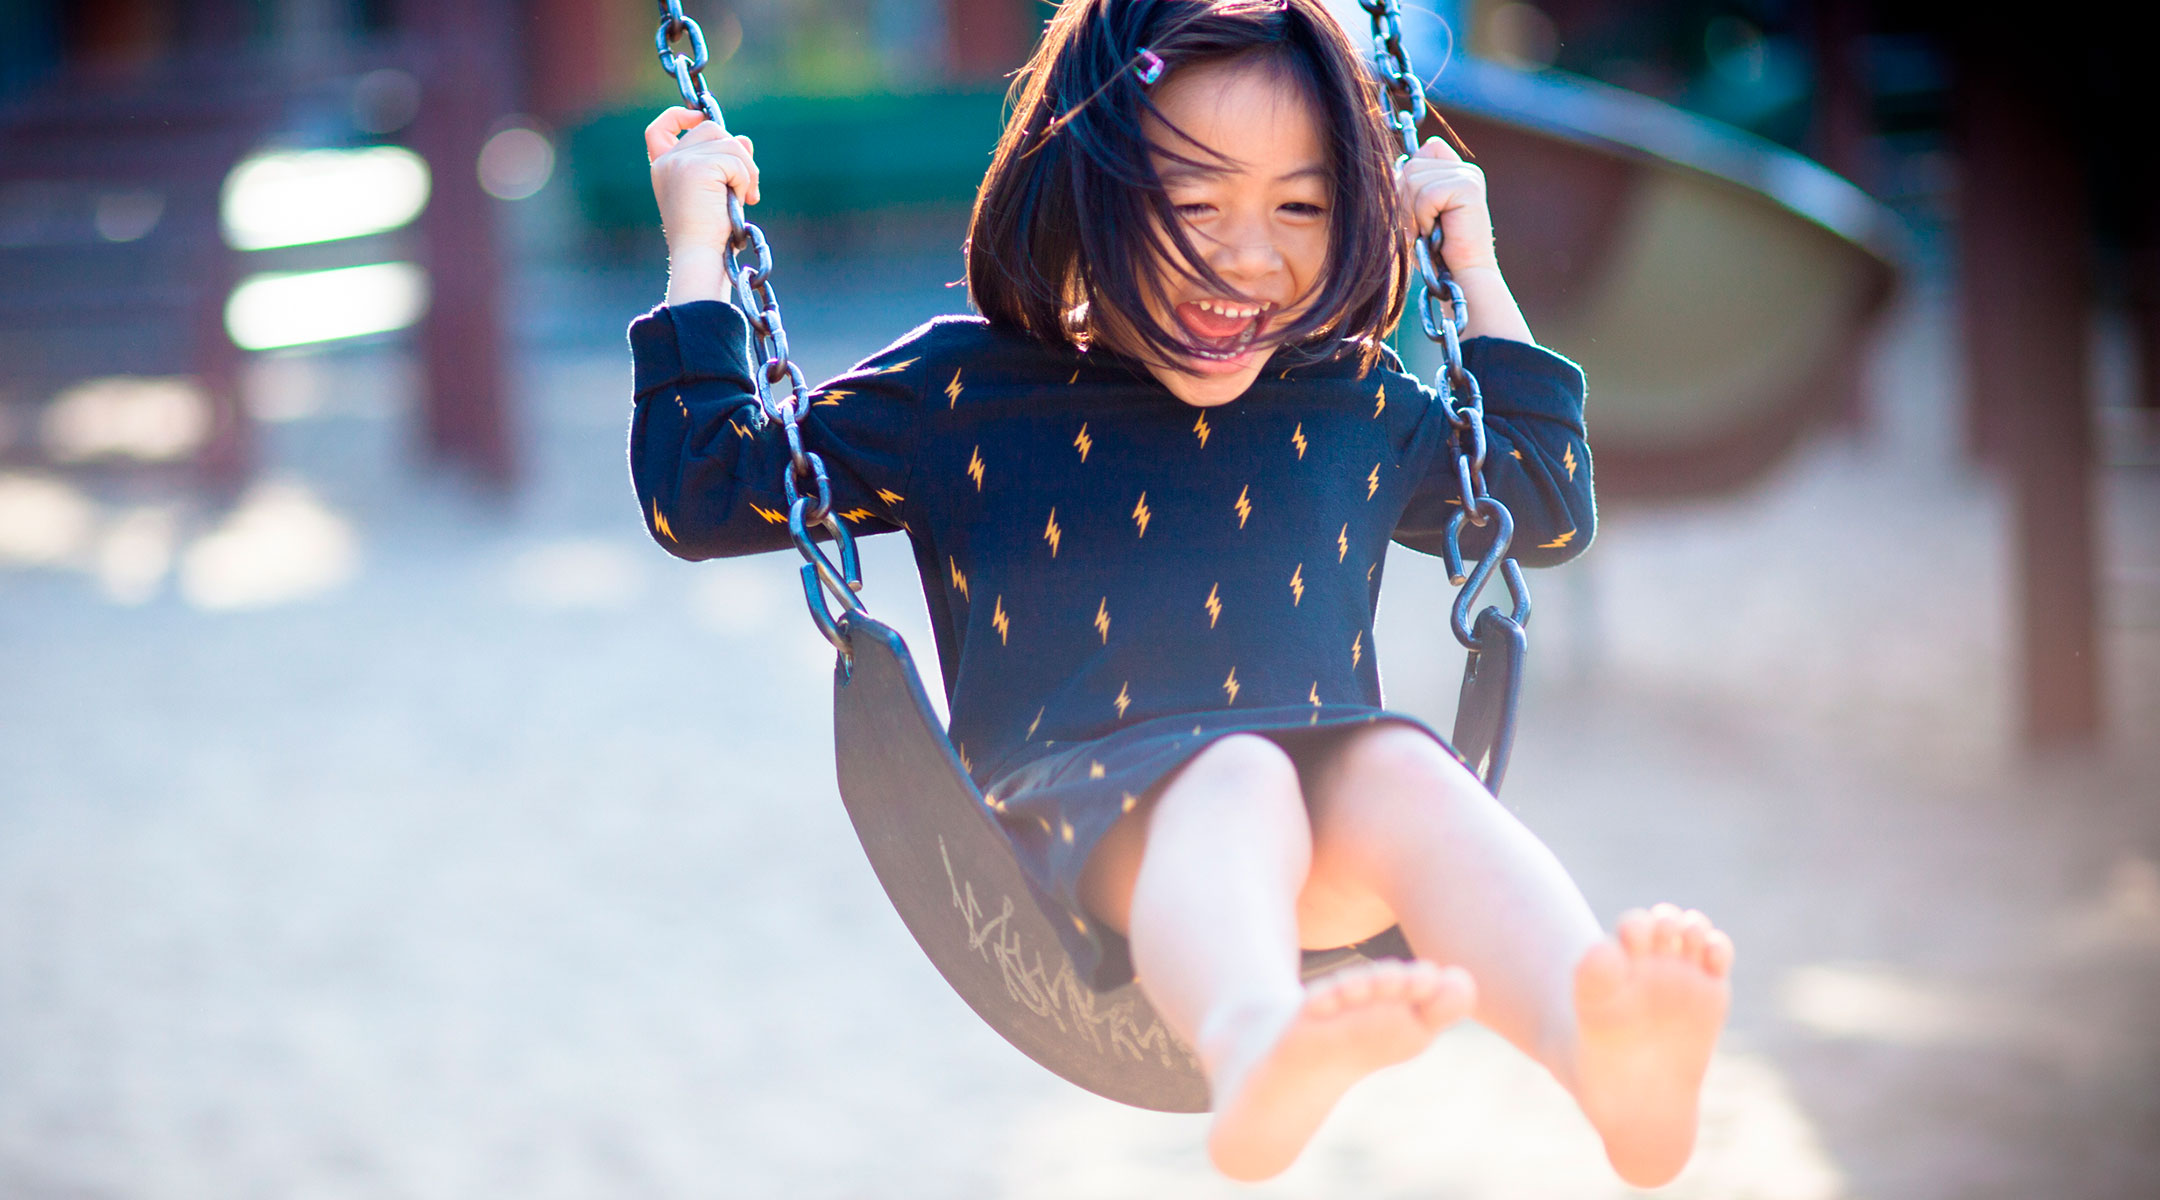 little girl swinging on swing at playground by herself